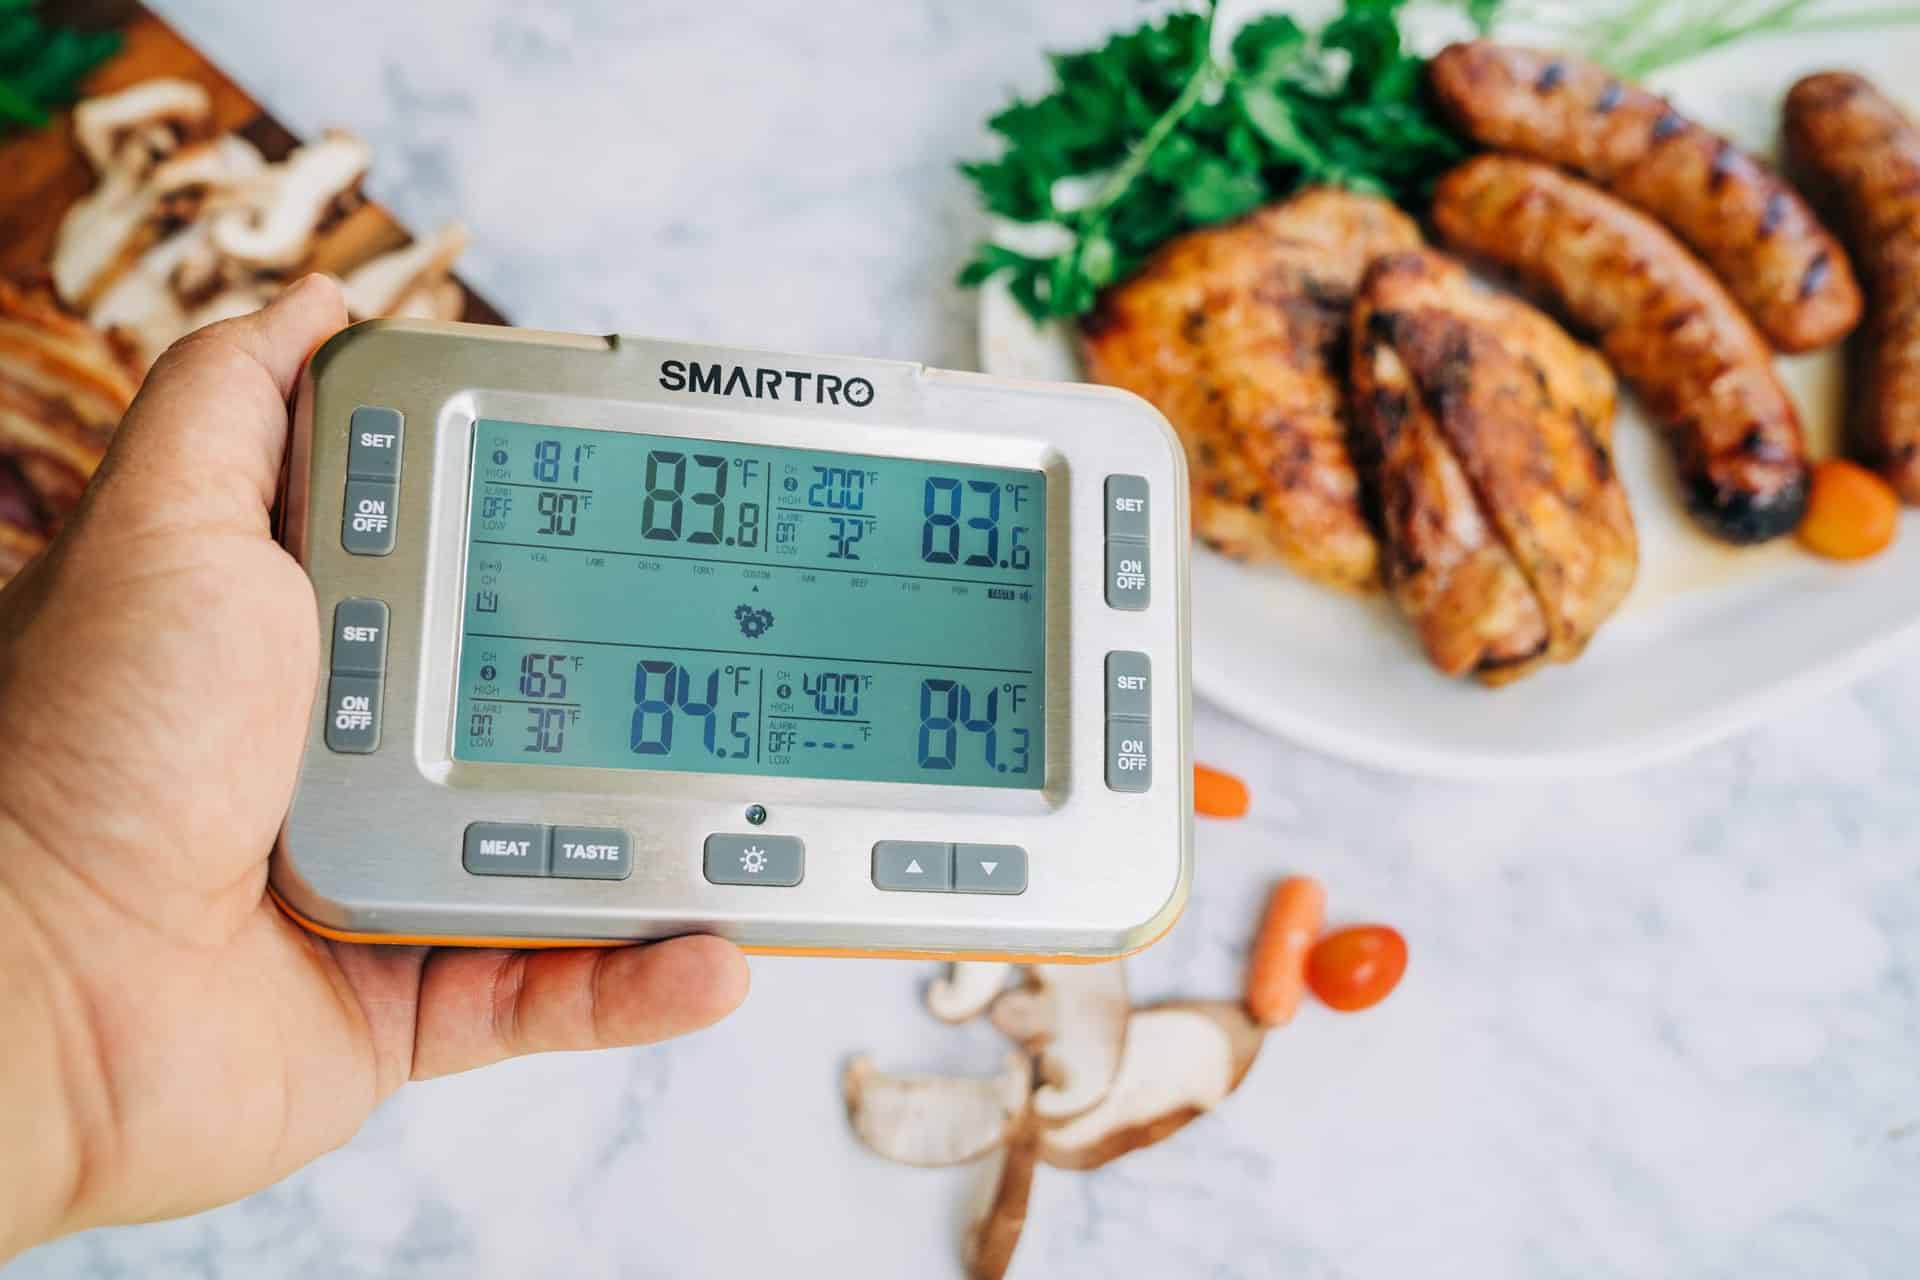 https://www.chefstemp.com/wp-content/uploads/2022/10/smartro-X50-Wireless-Meat-Thermometer-4-Probes-4-scaled.jpg